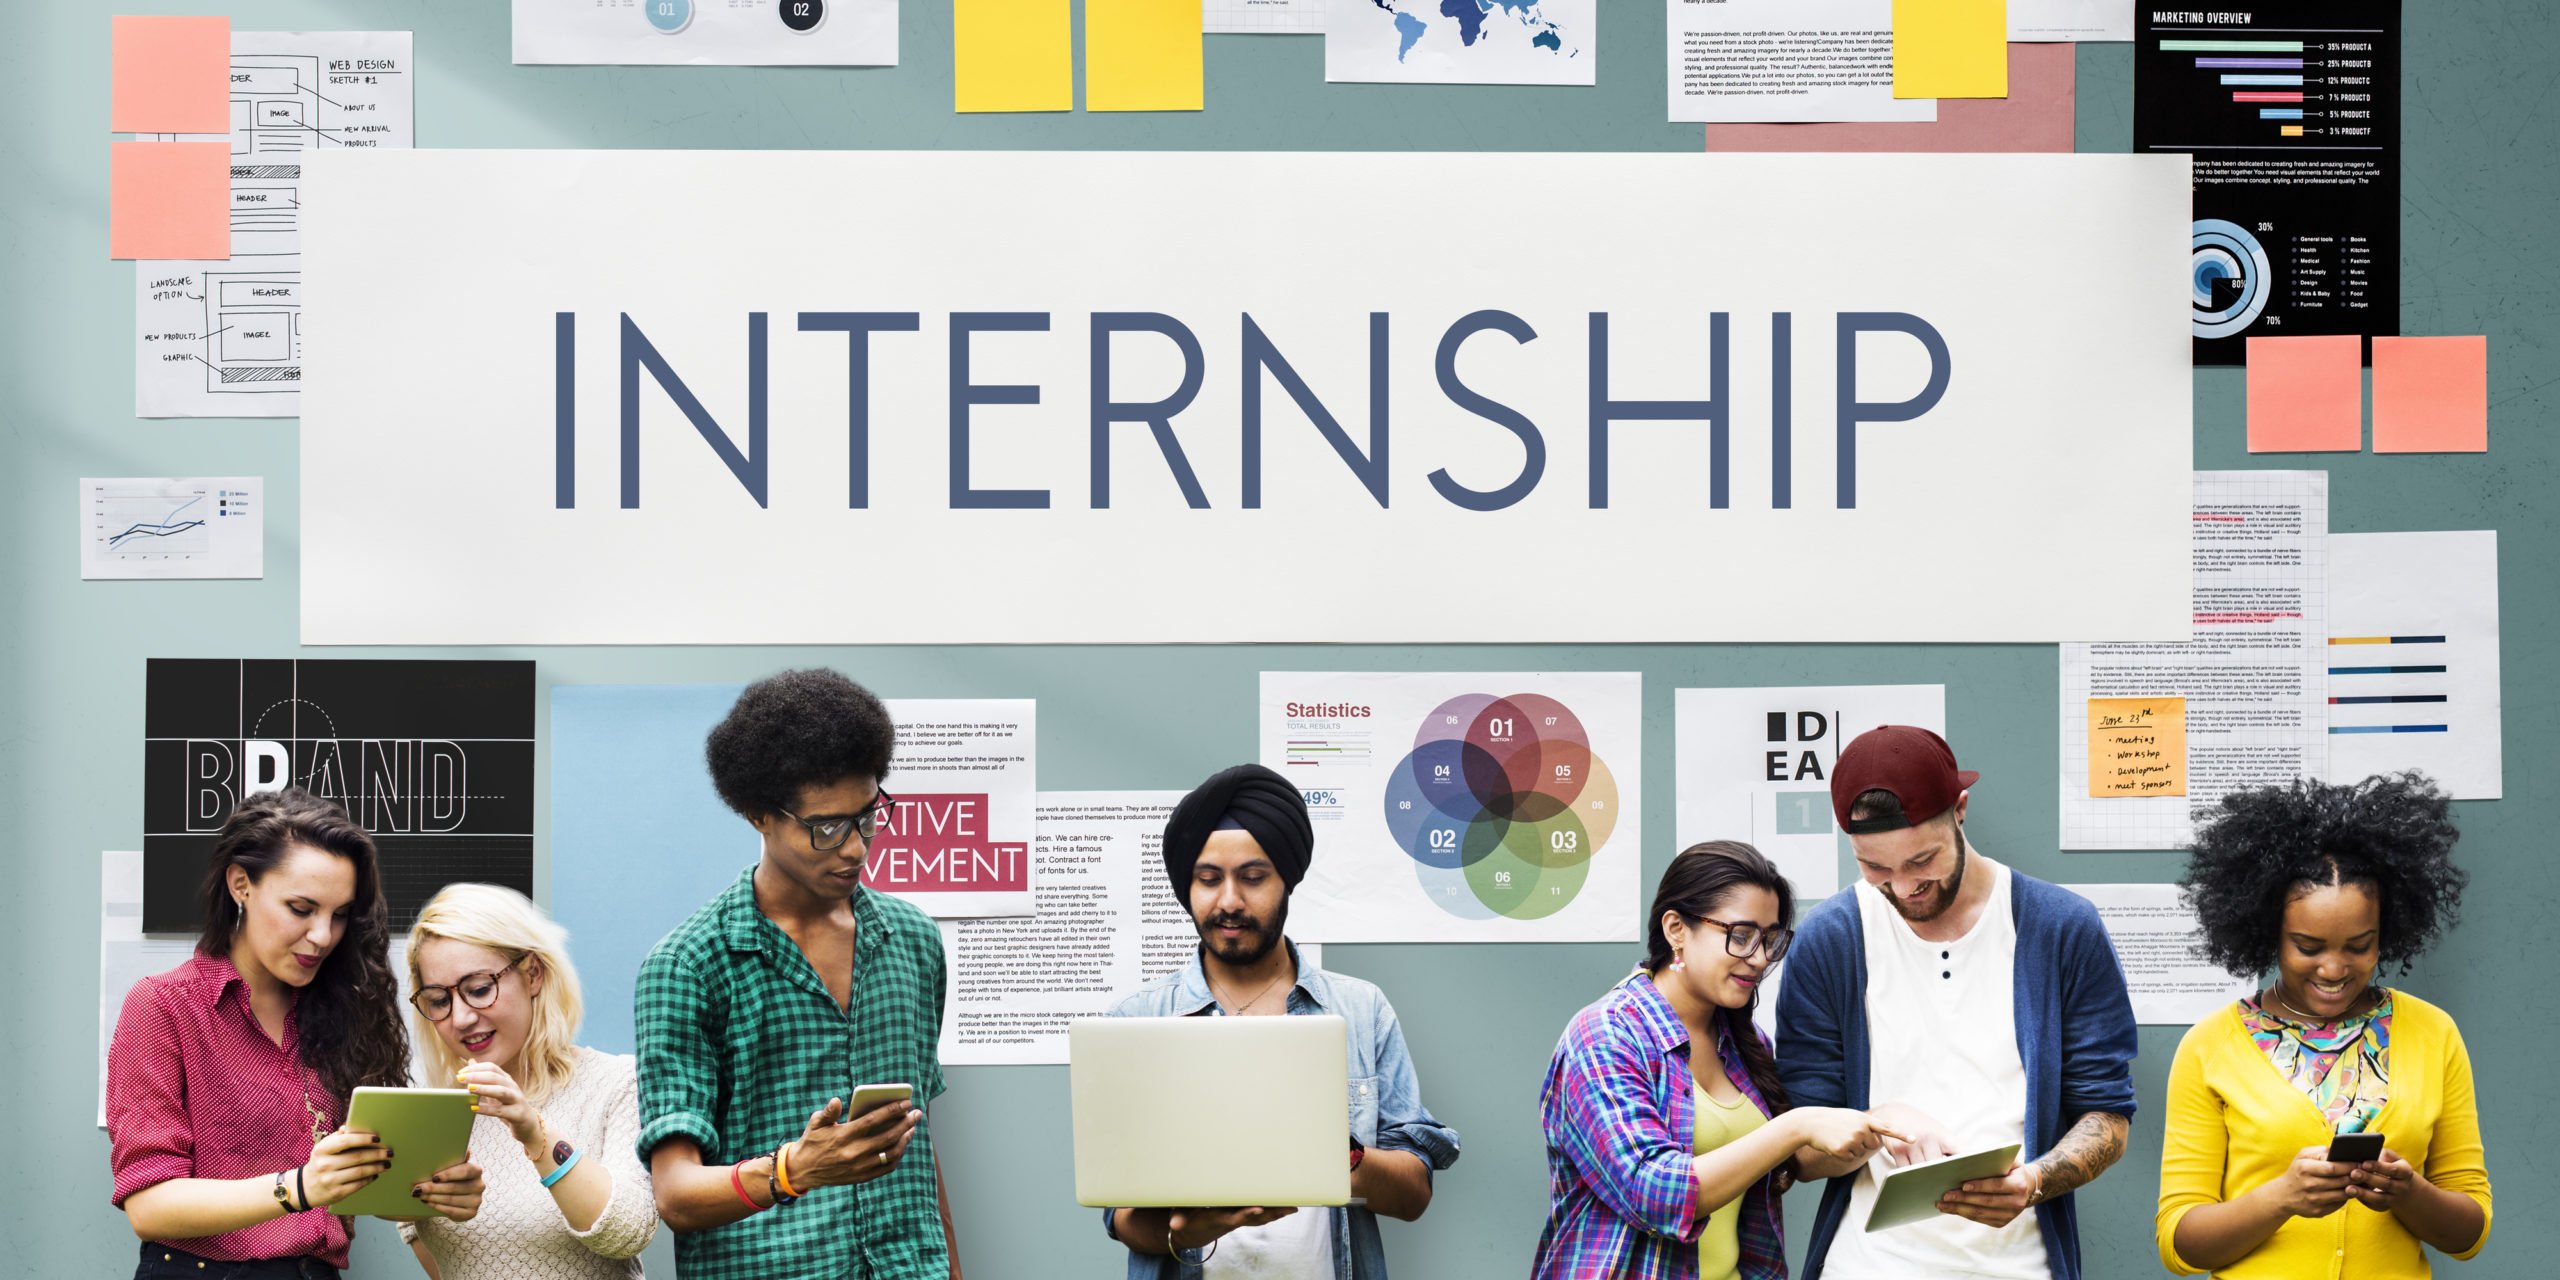 How to apply for an internship? Career Tips, Interview Tips, Employer